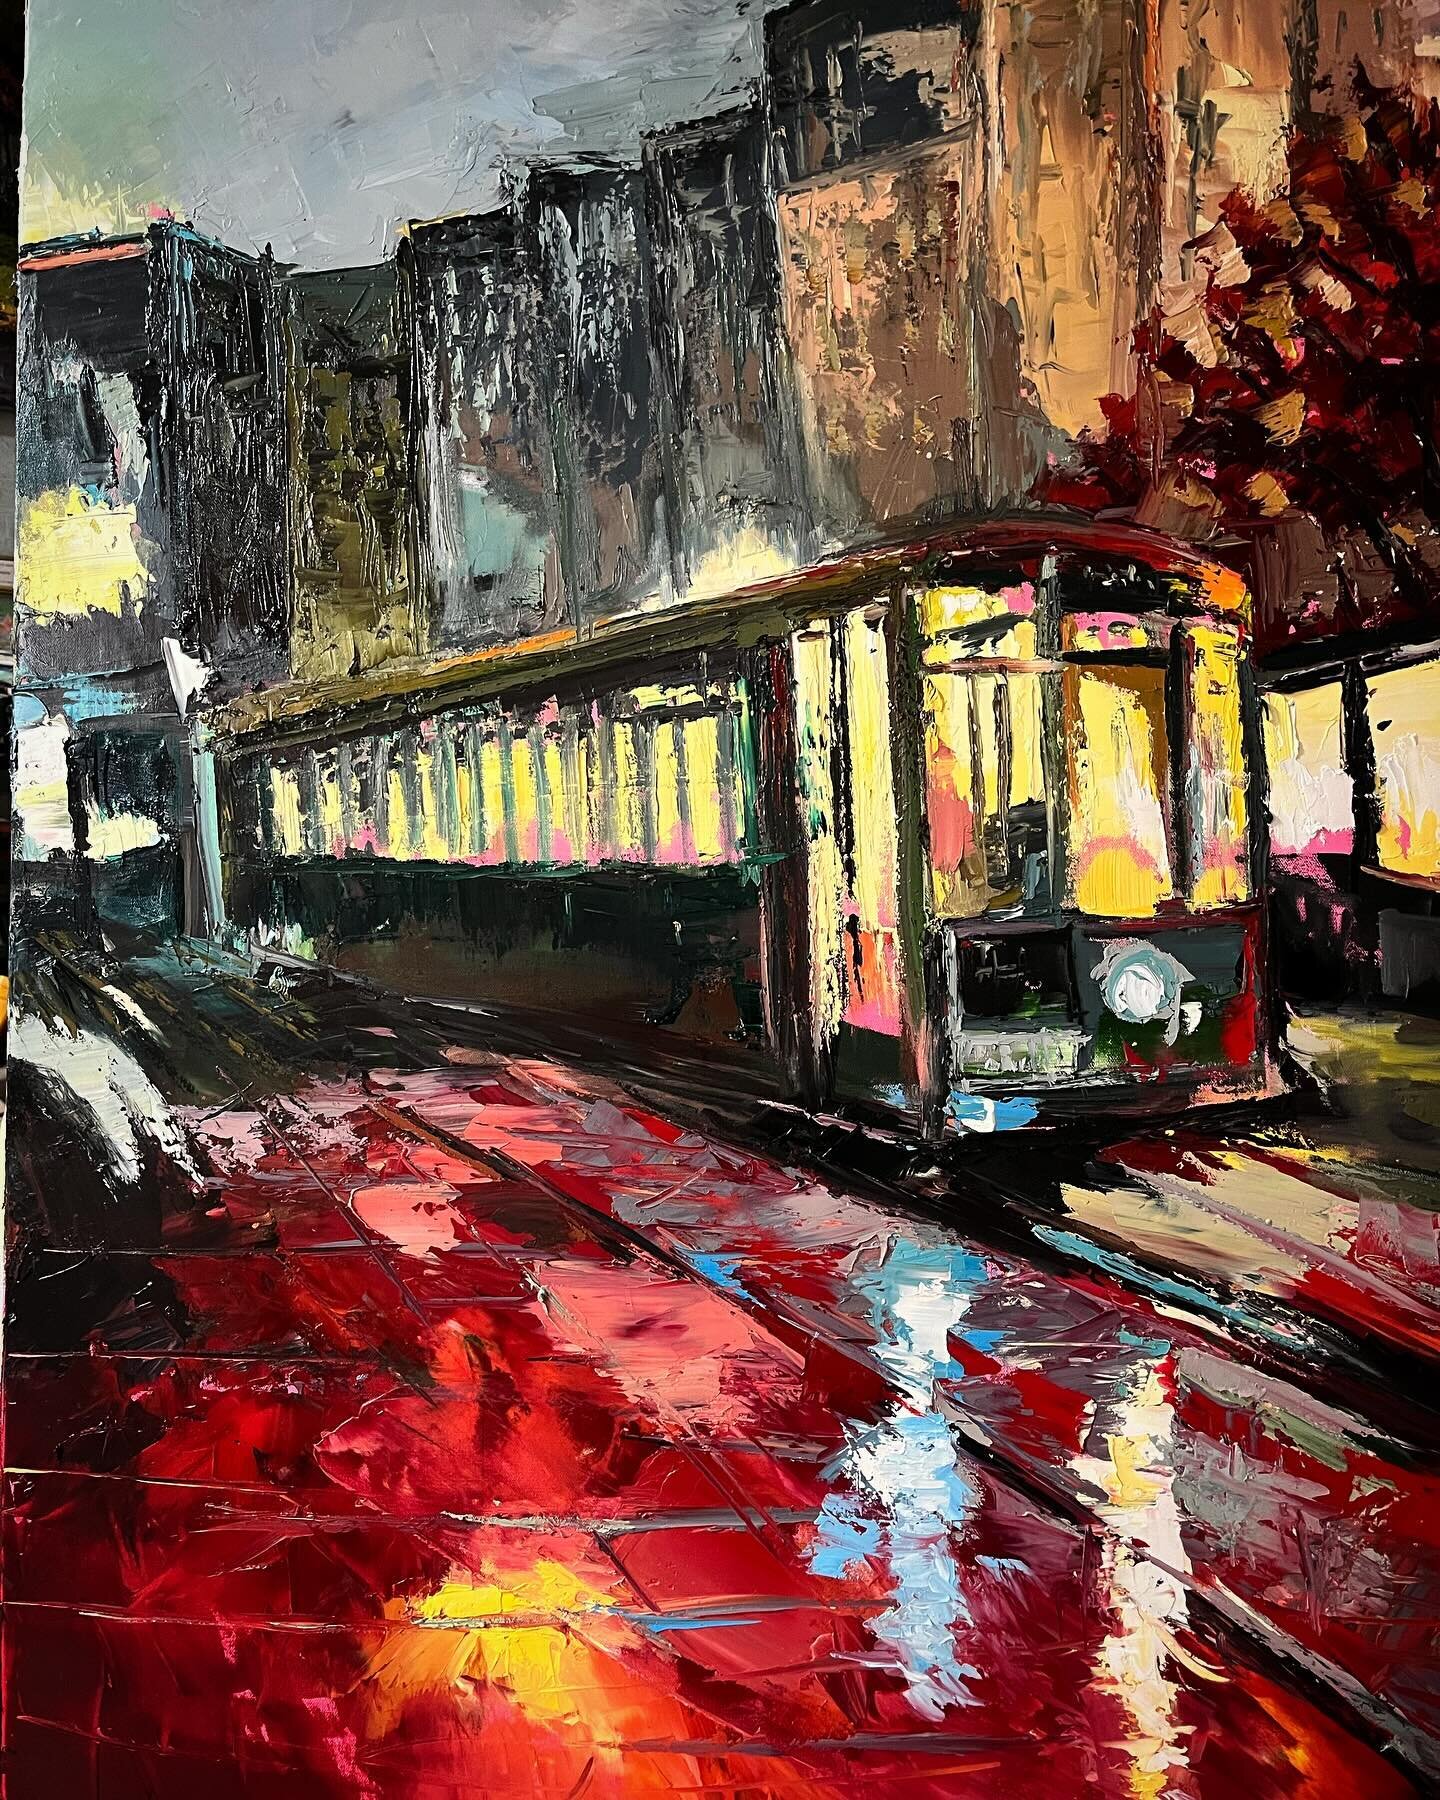 Still lot&rsquo;s of work to be done, but my first painting from our New Orleans trip. 48&rdquo;x36&rdquo;